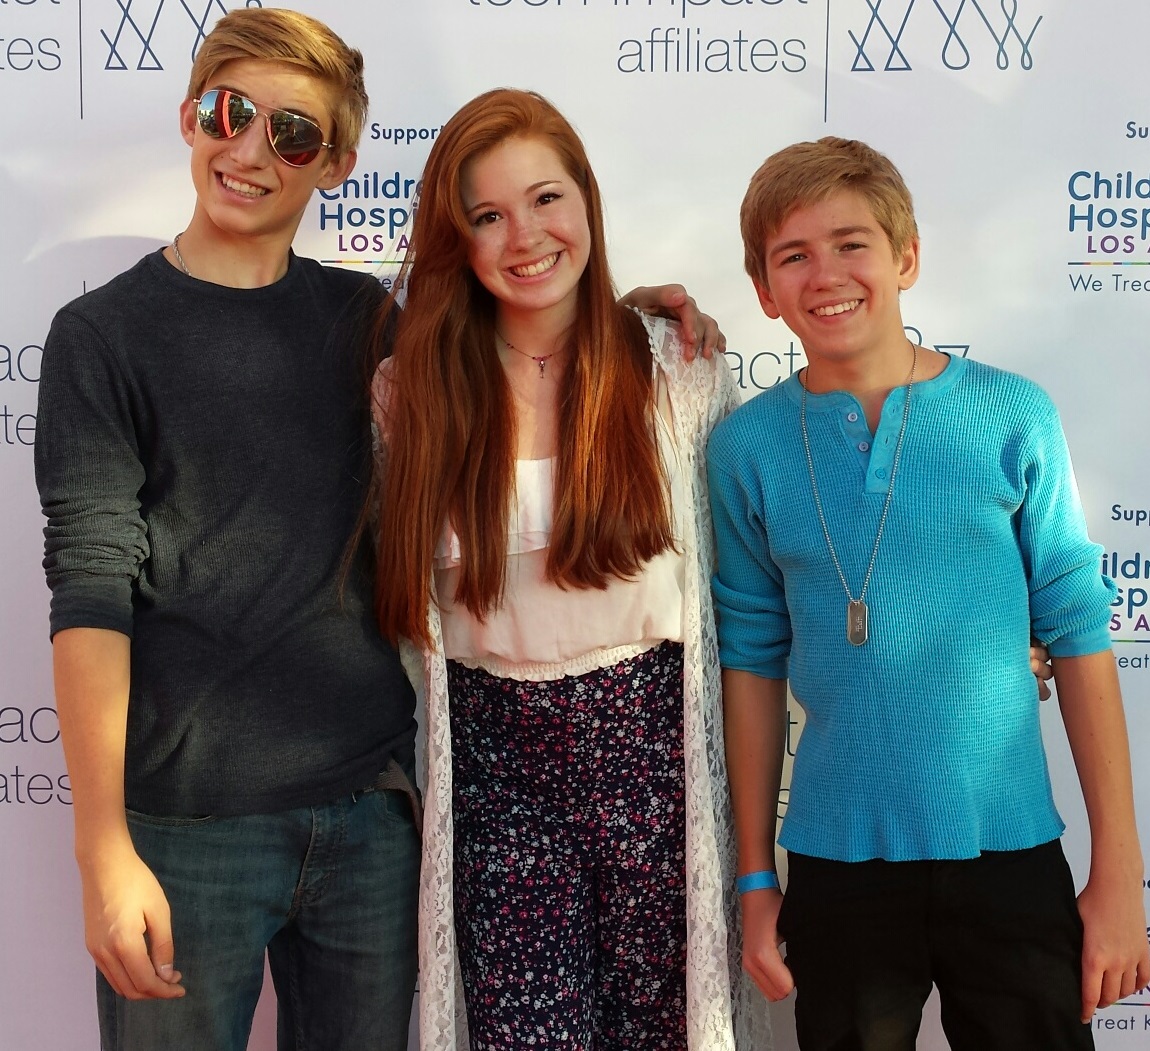 On the red carpet at the Teen Impact Affiliates(2014) charity at the Los Angeles Sports Museum with Nicki Kelly and Jack Dean.